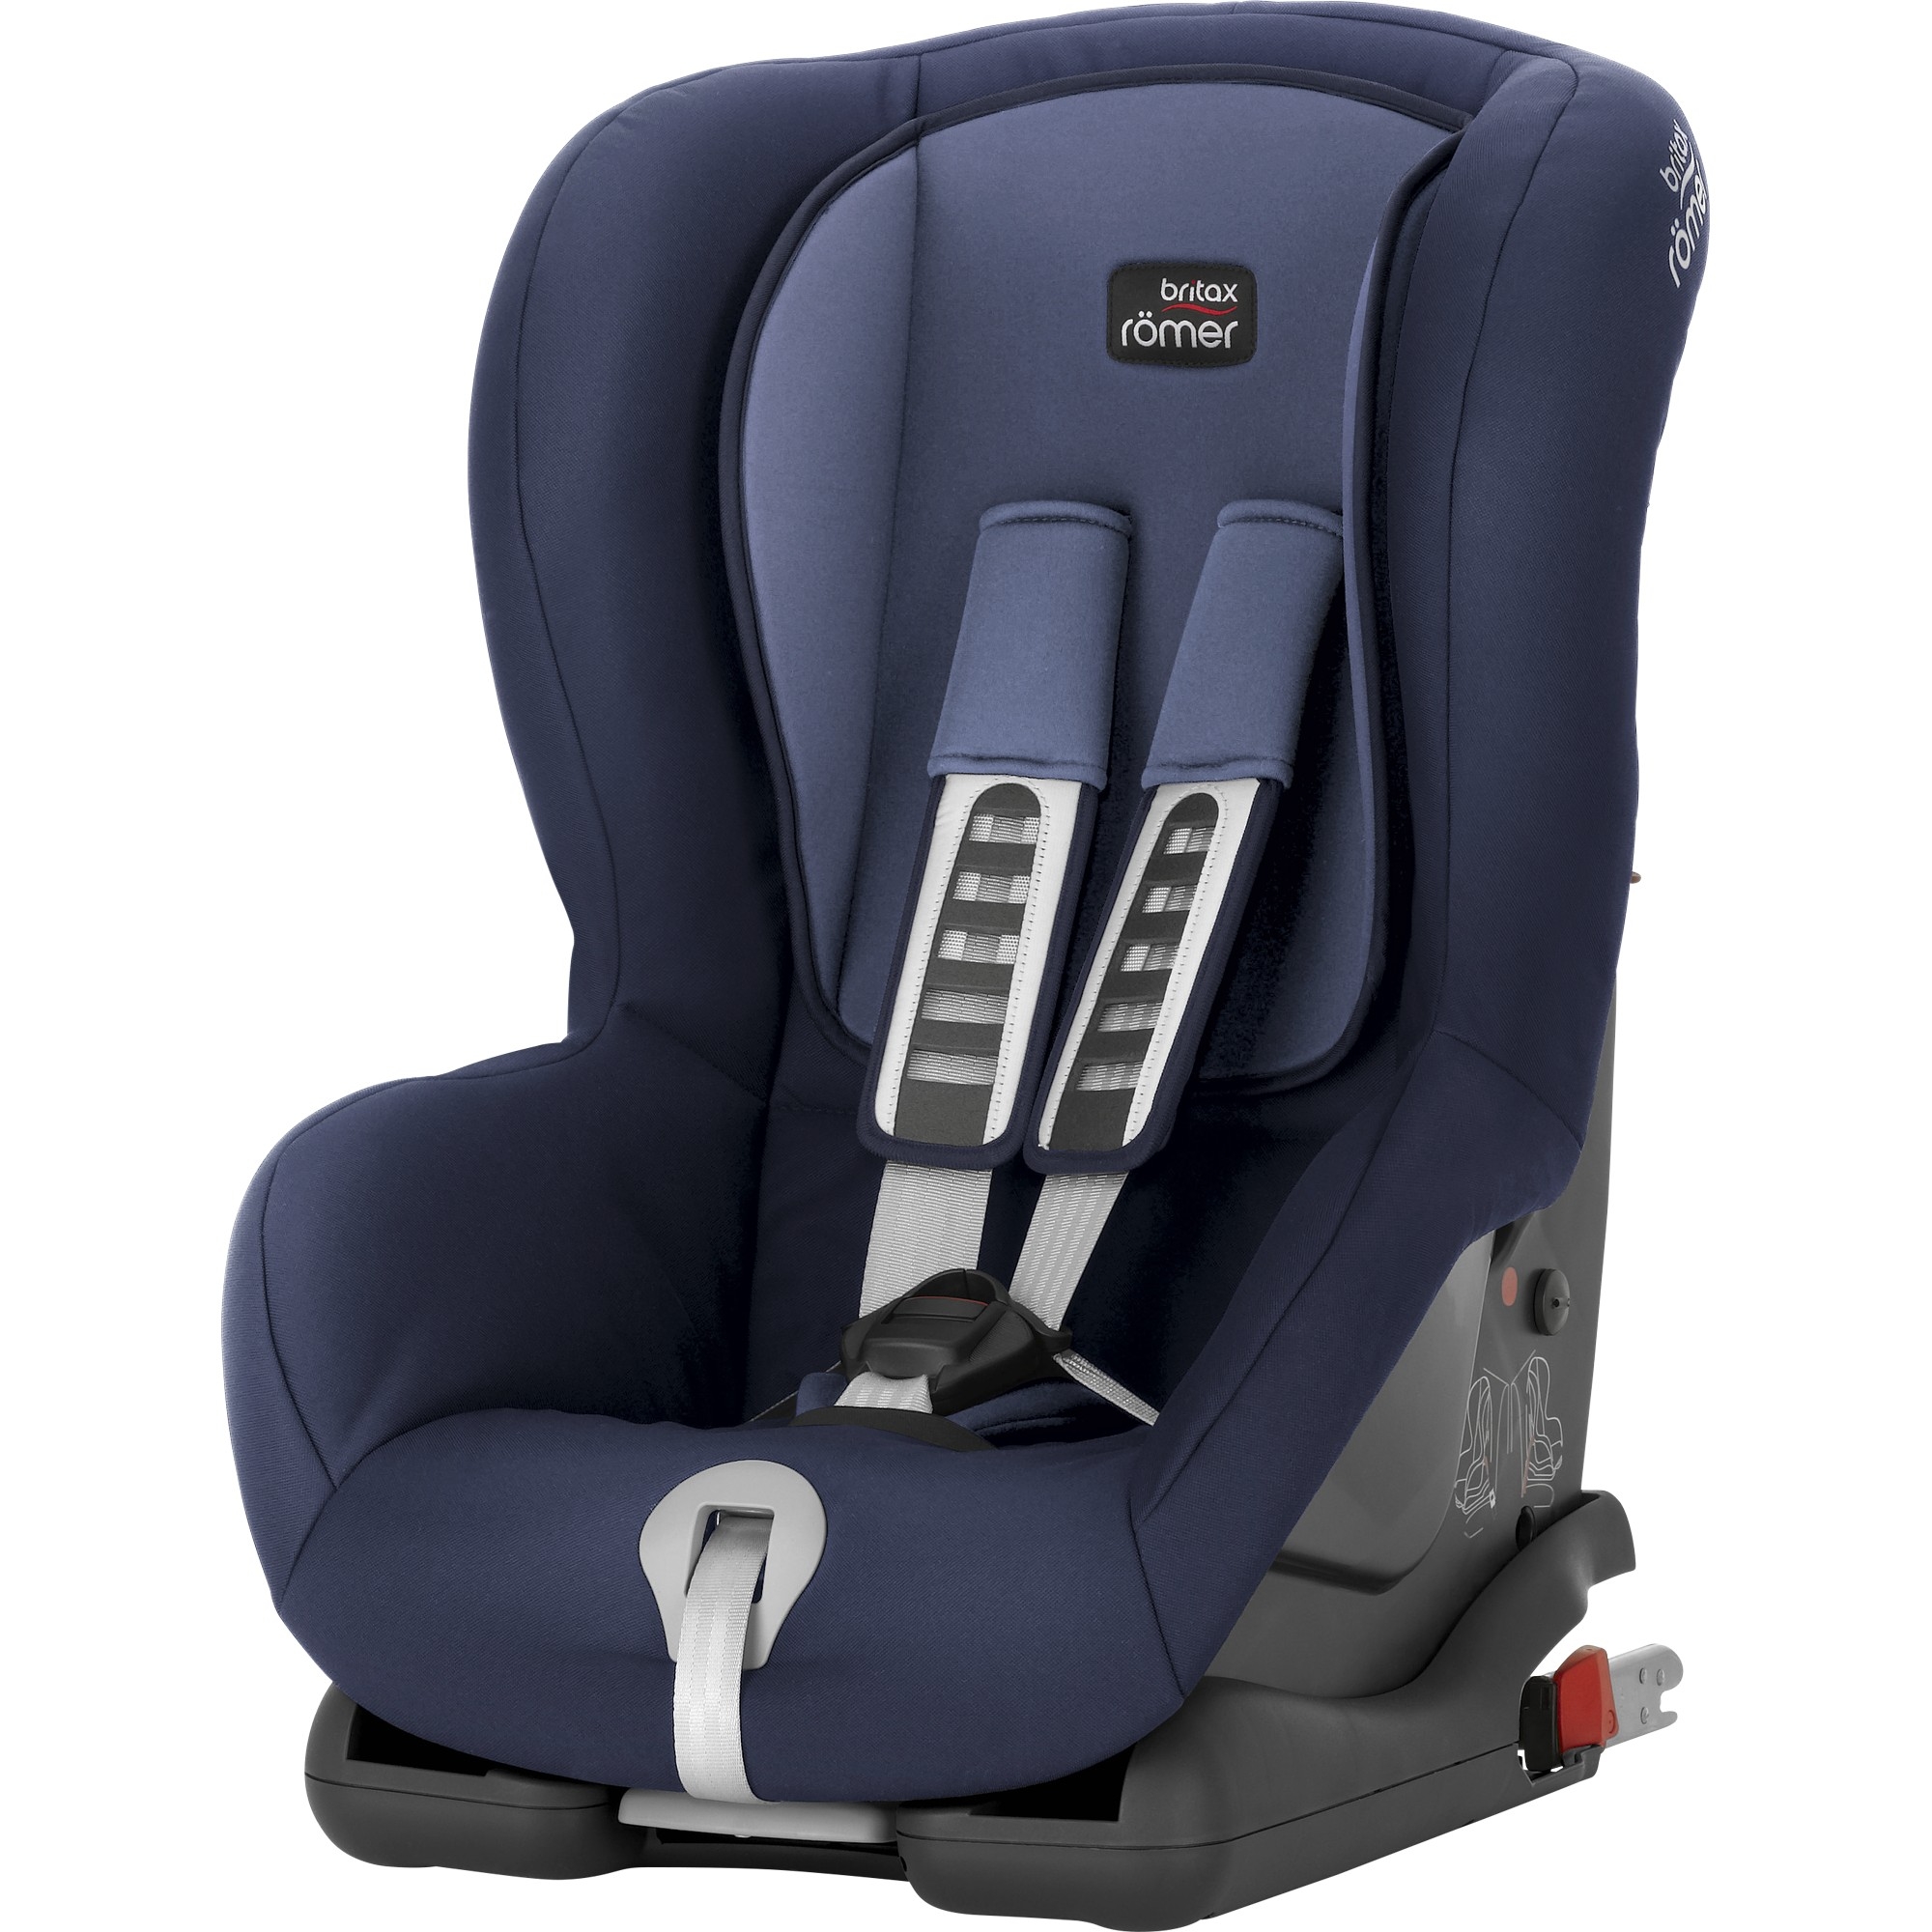 cosco rightway booster car seat